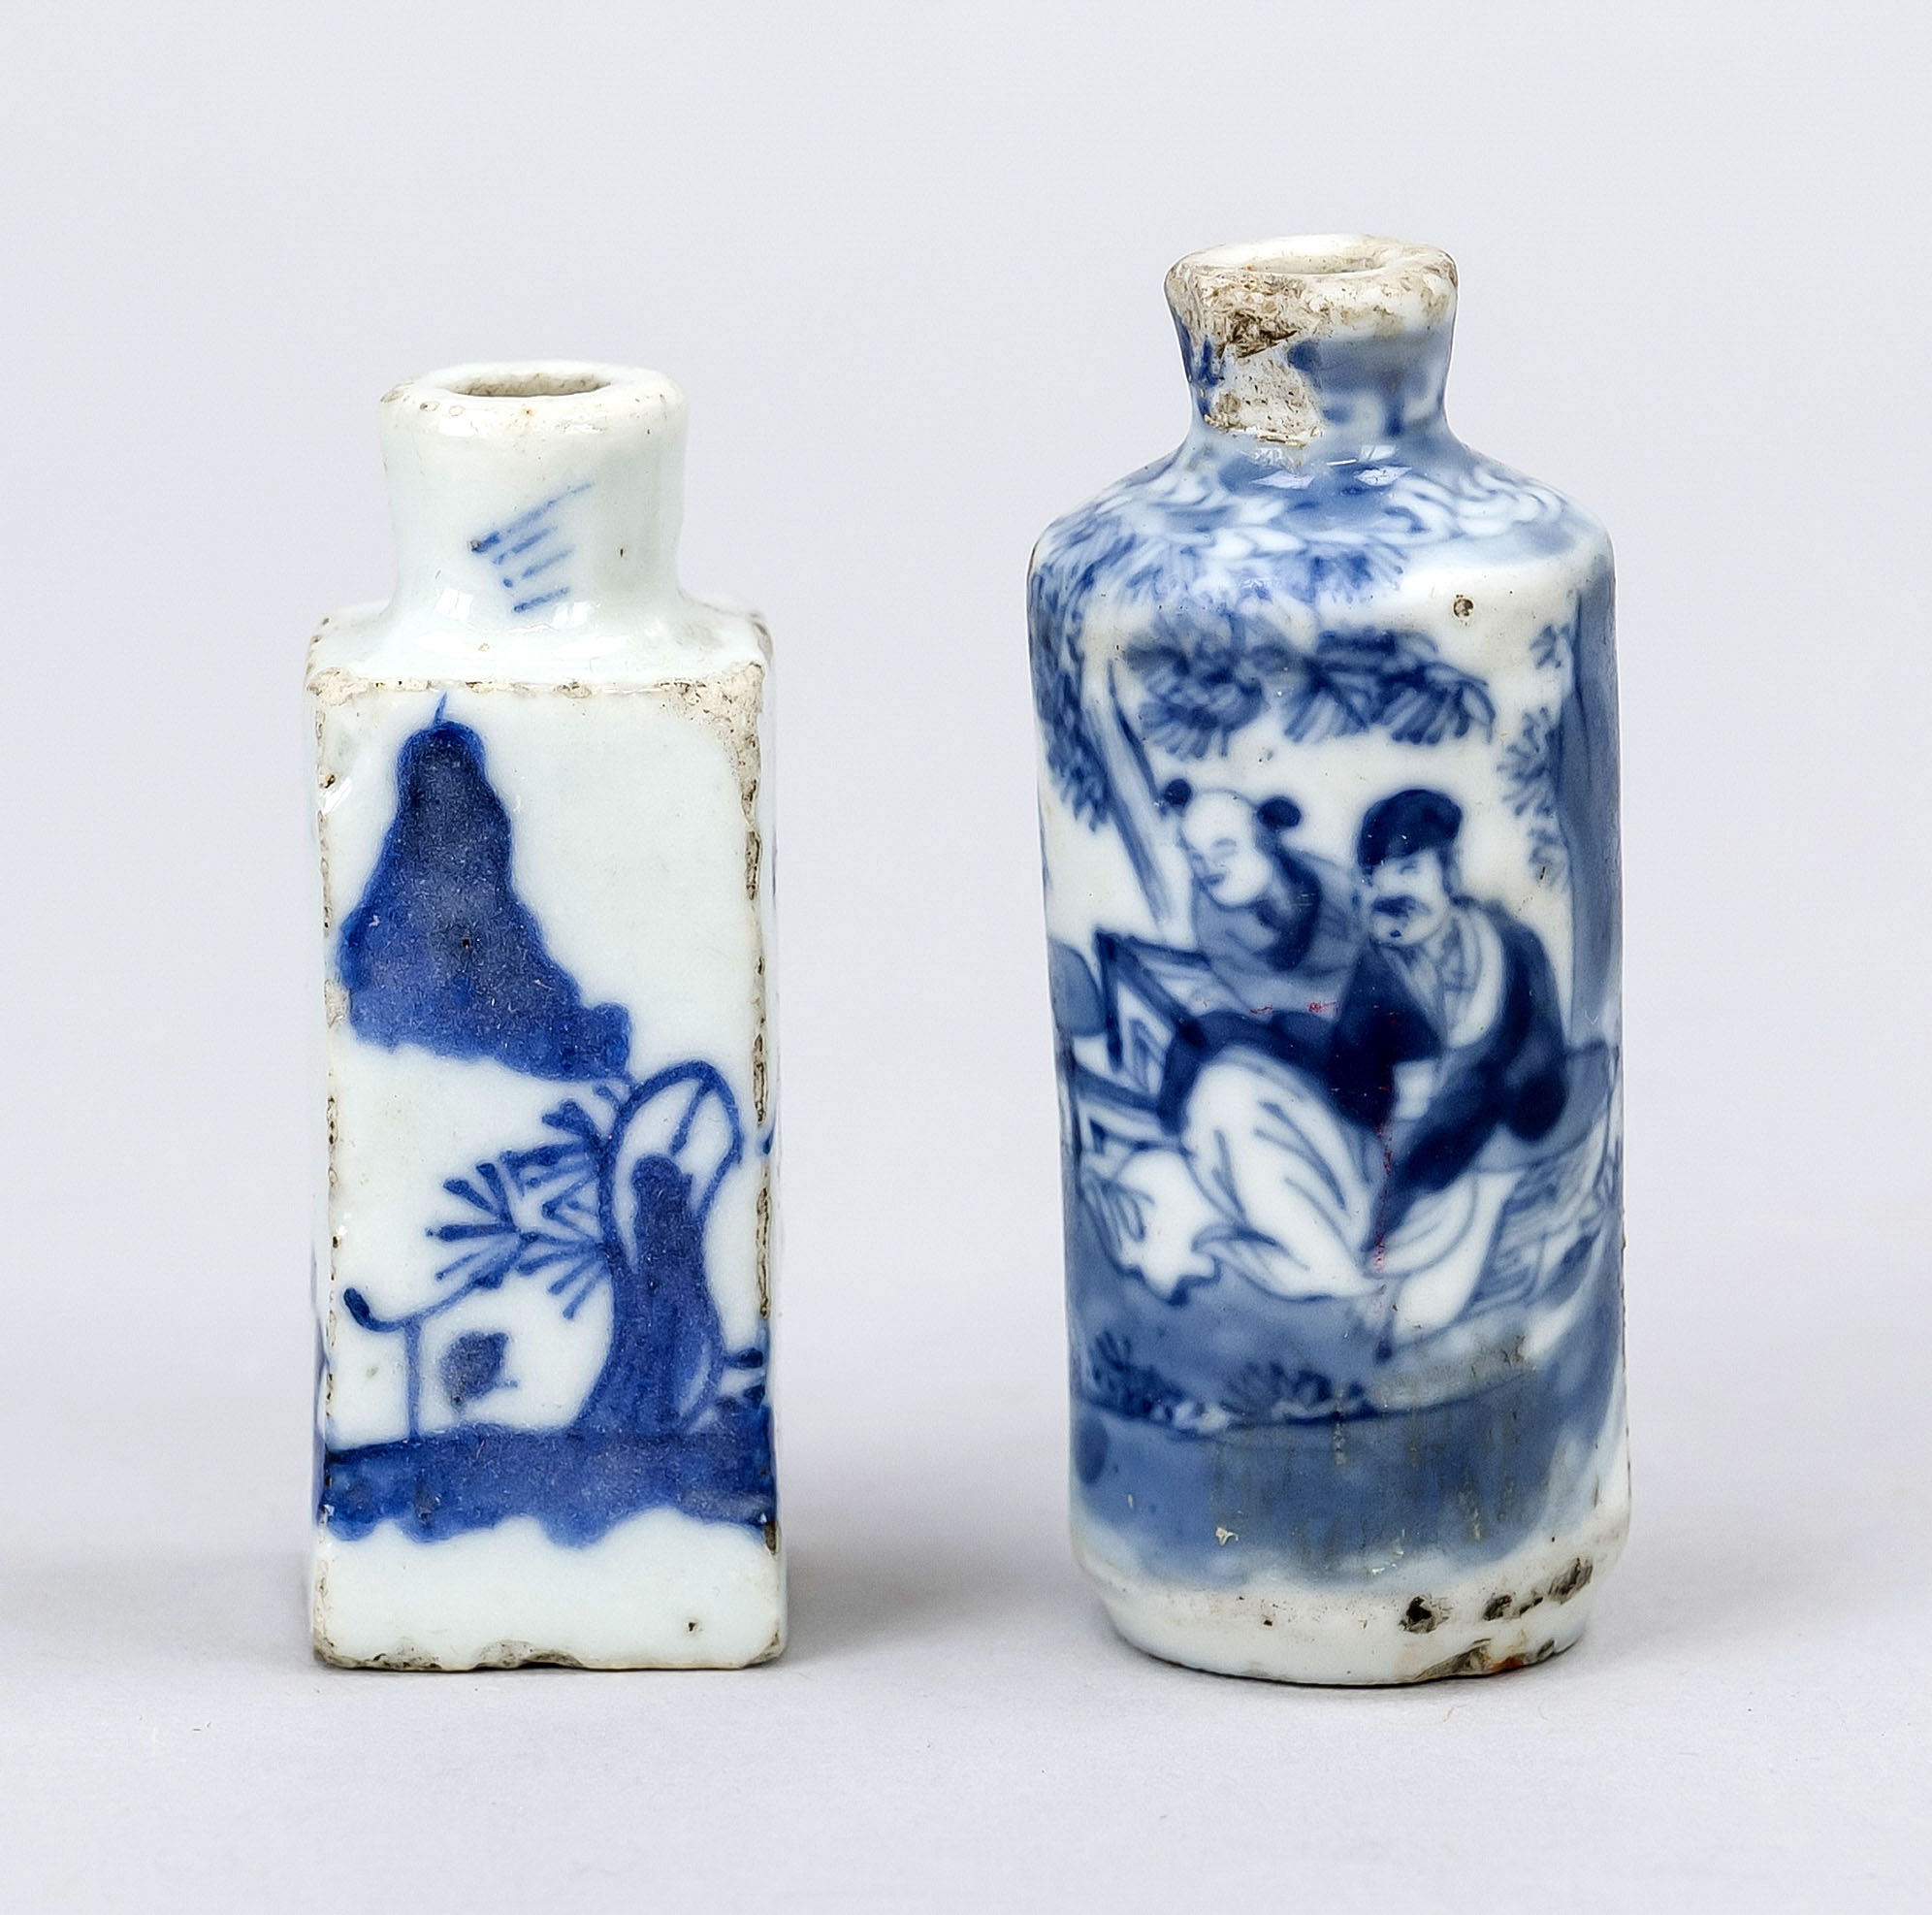 2 Snuffbottles, China, 17th/18th century, porcelain with cobalt blue decoration. 1 x round with 4-